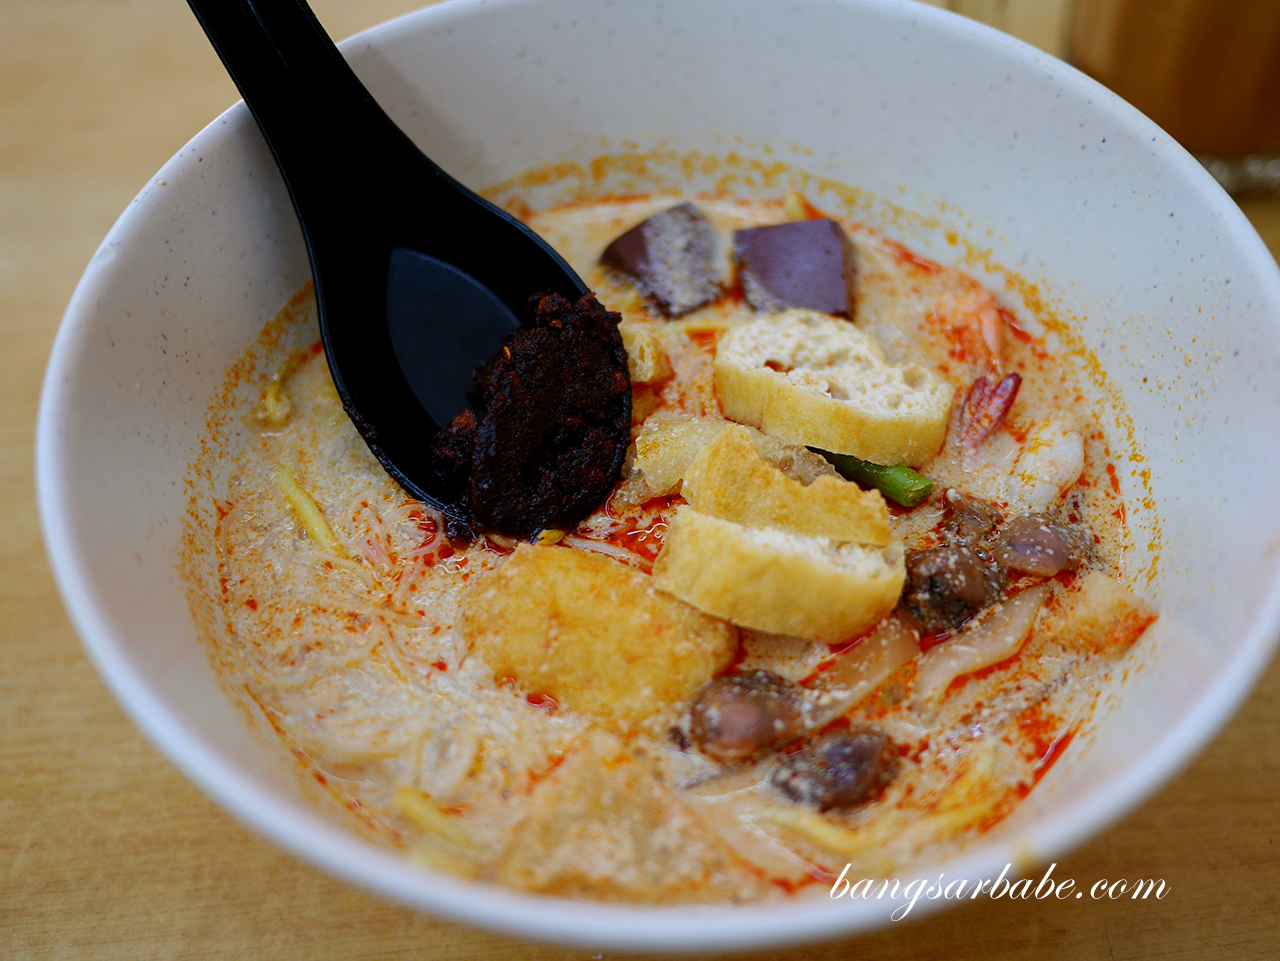 Penang Curry Mee